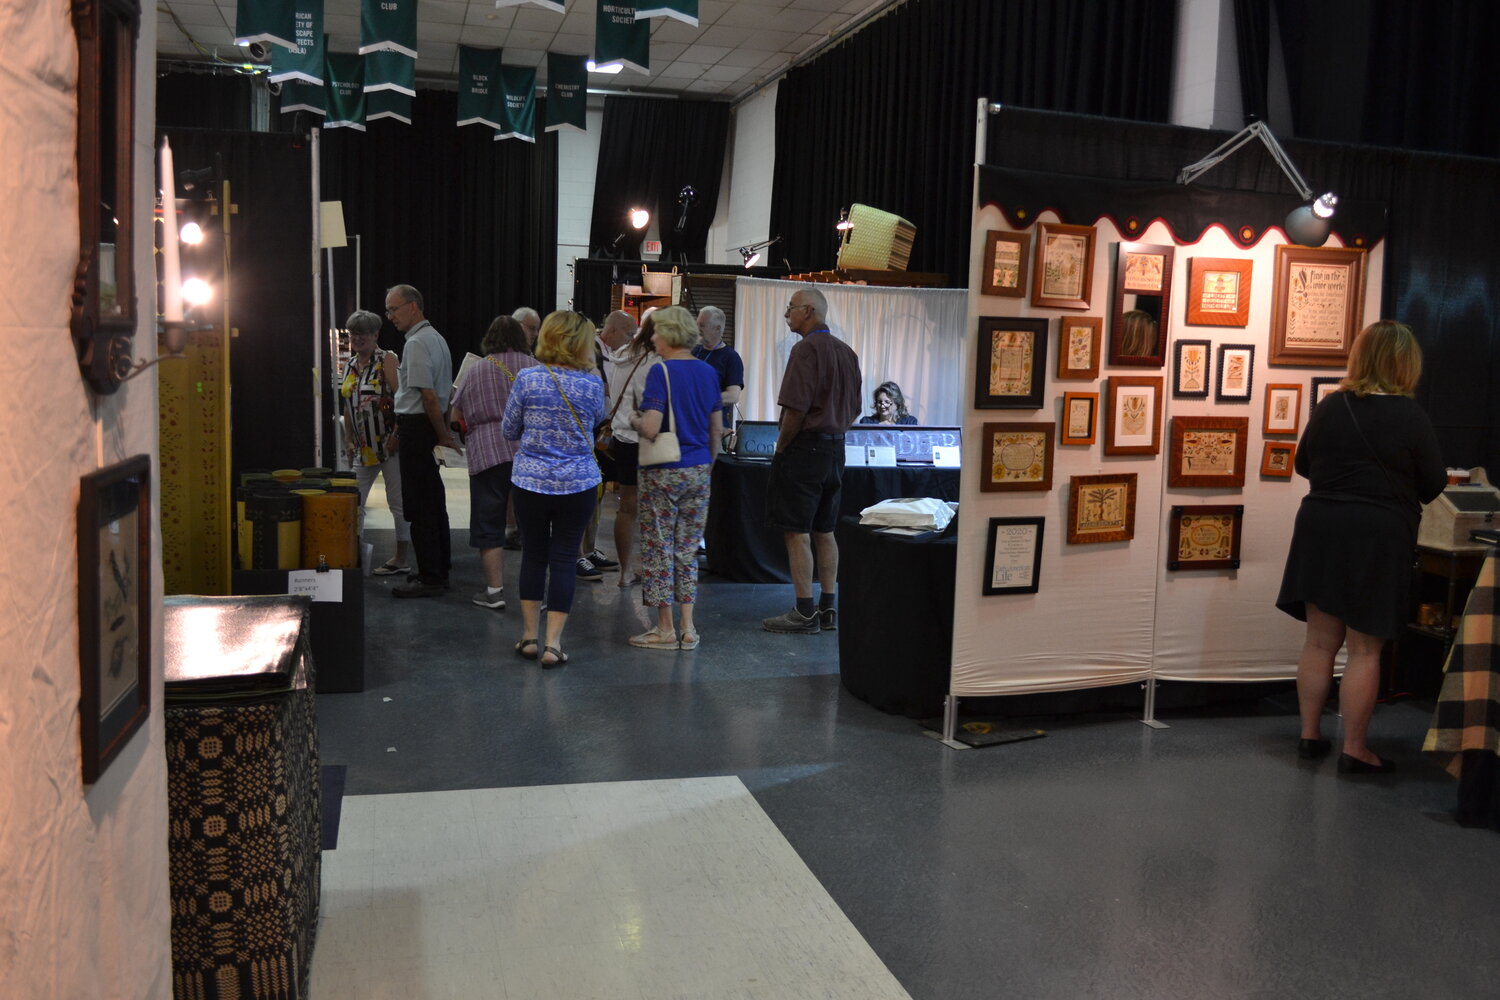 The Bedminster Traditional Artisan Show began approximately 20 years ago in a Bedminster Township home. It is now held at Delaware Valley College in Doylestown.